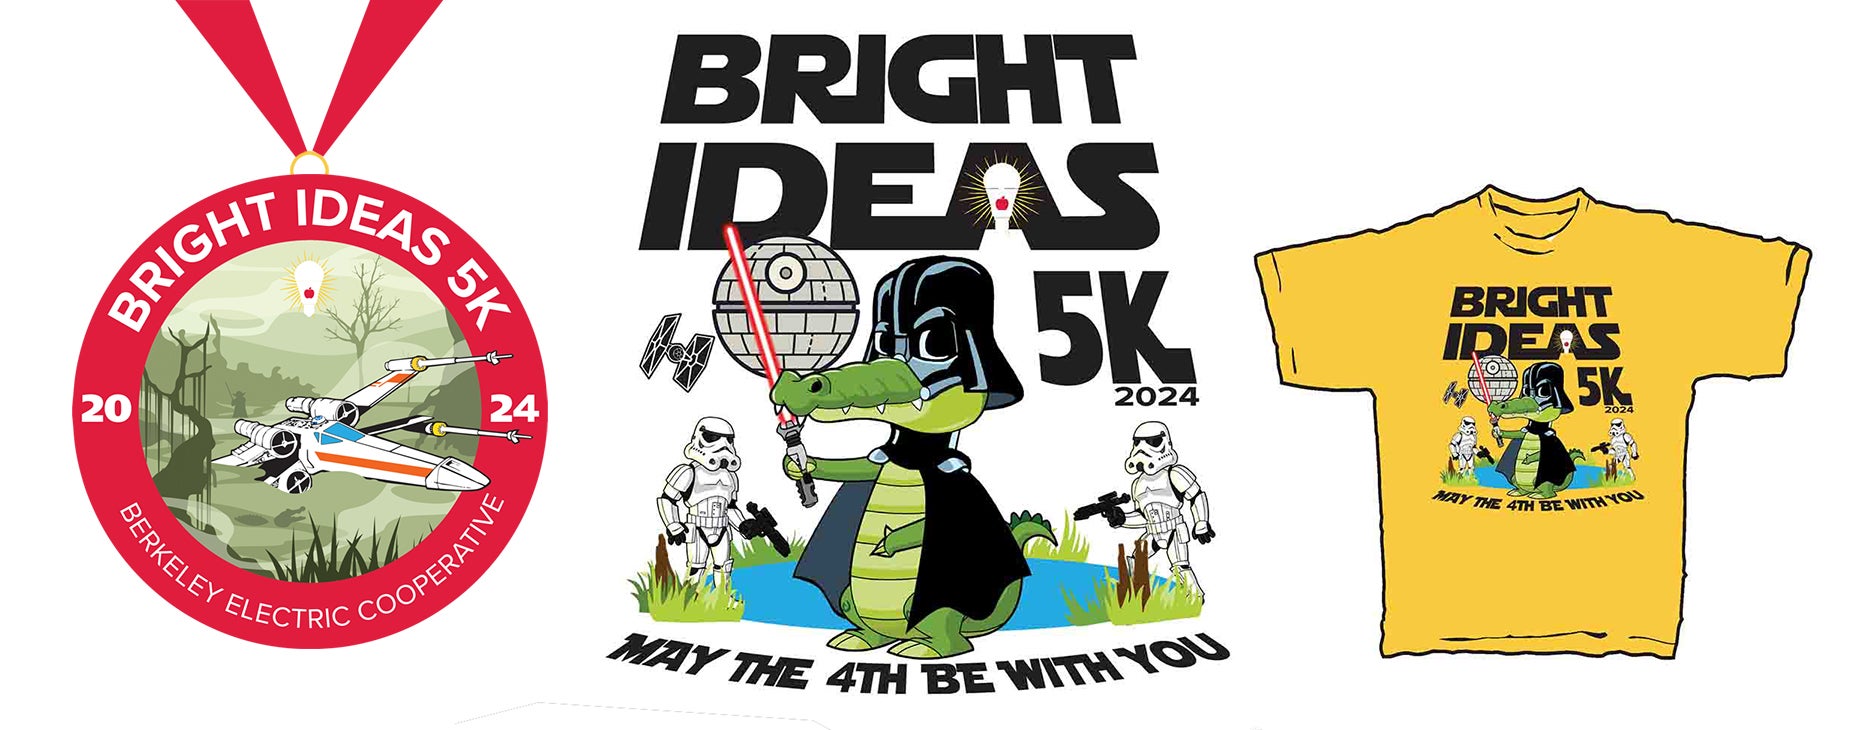 Bright Ideas medal and t-shirt design